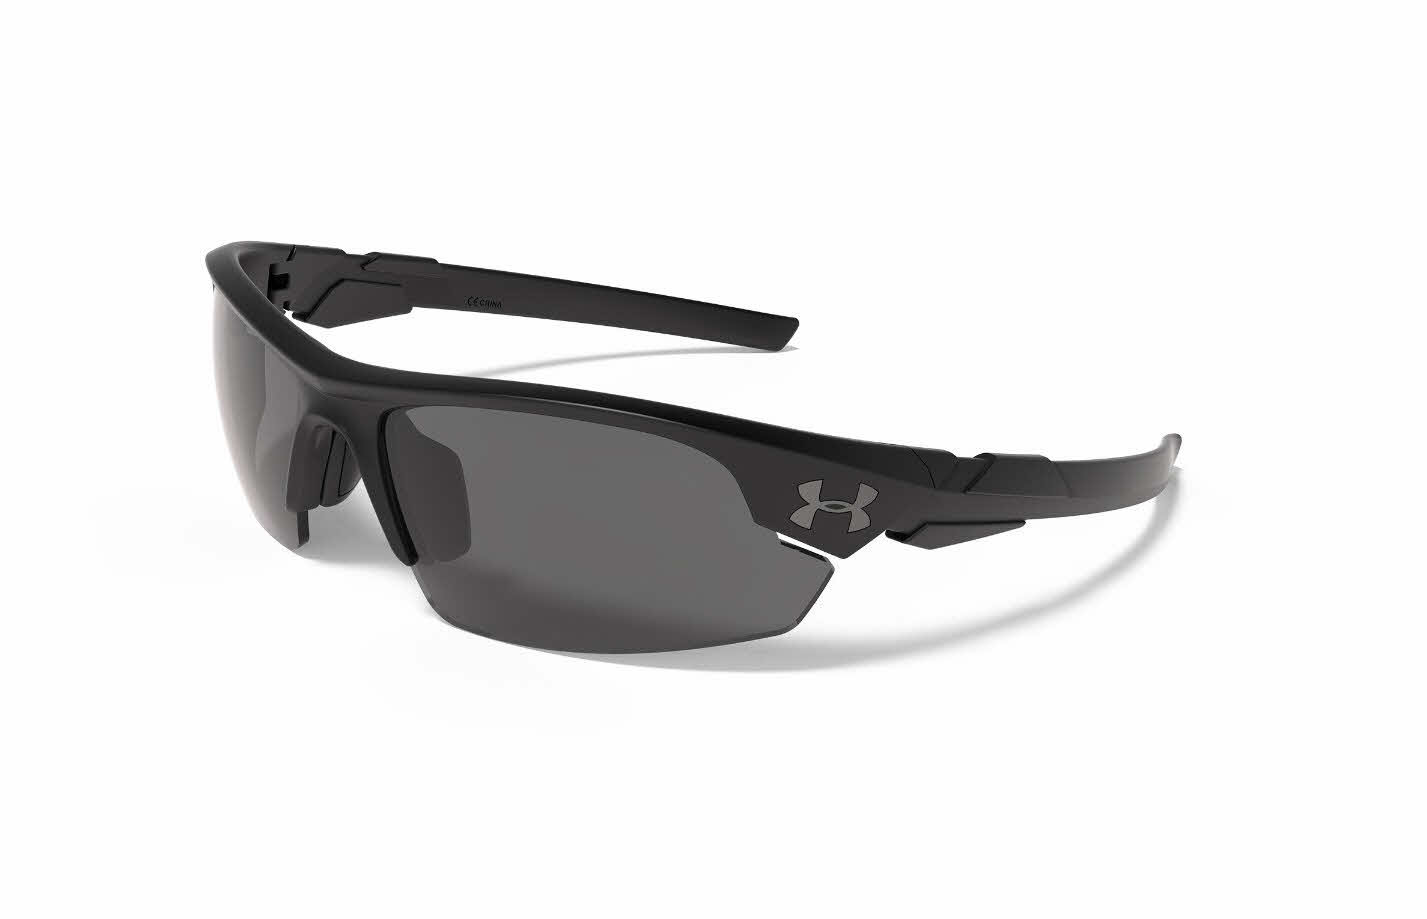 under armor youth sunglasses